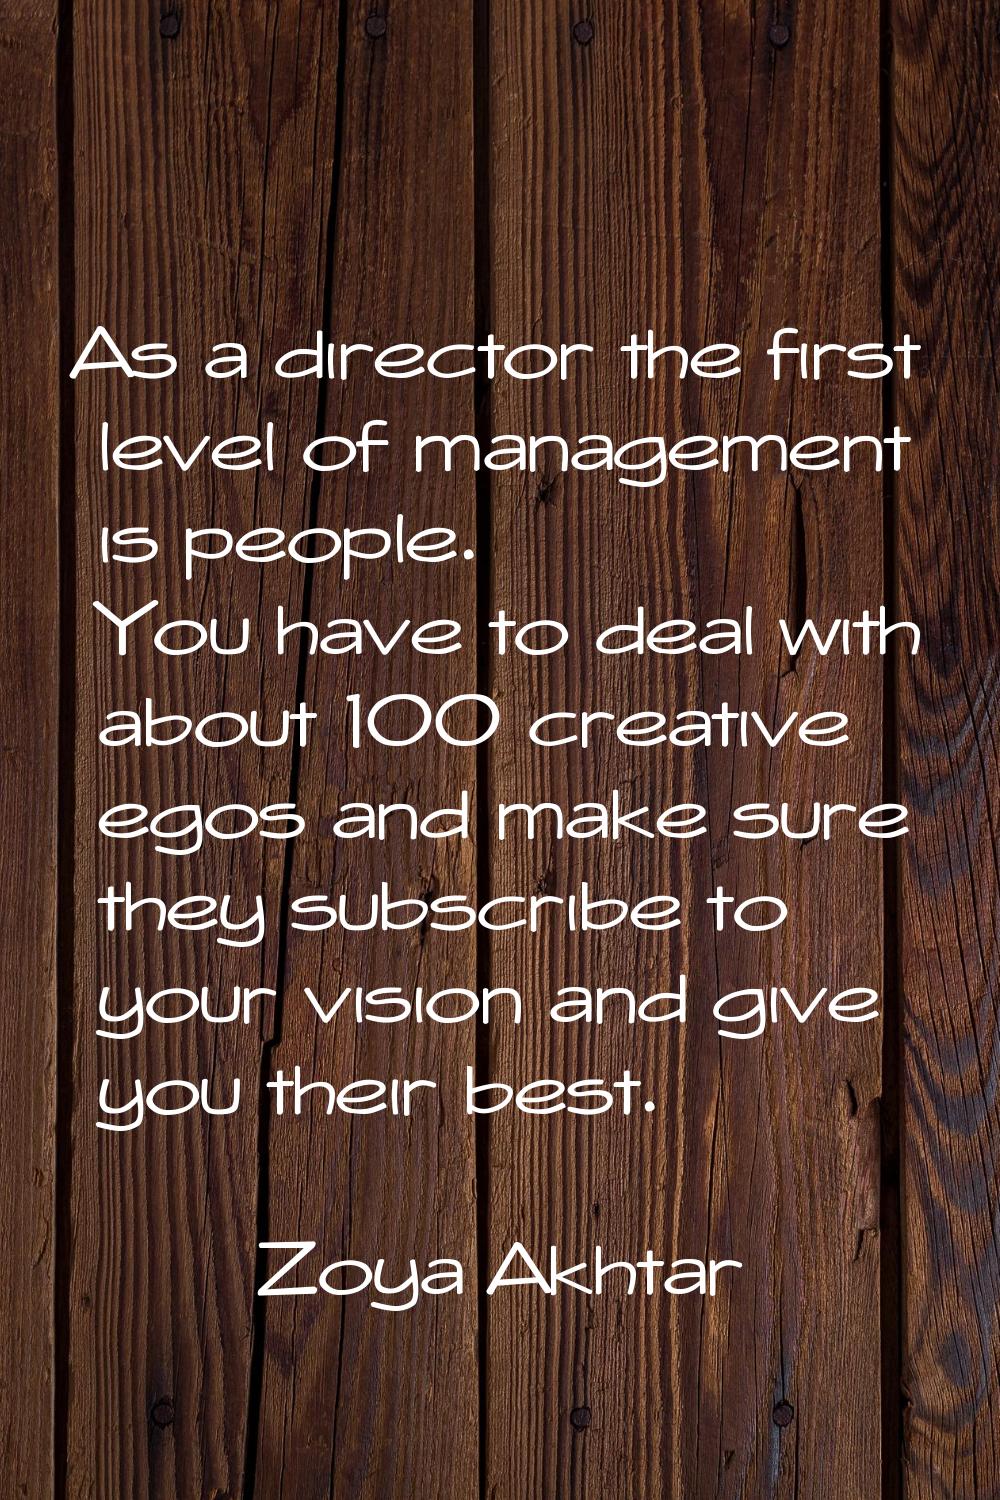 As a director the first level of management is people. You have to deal with about 100 creative ego